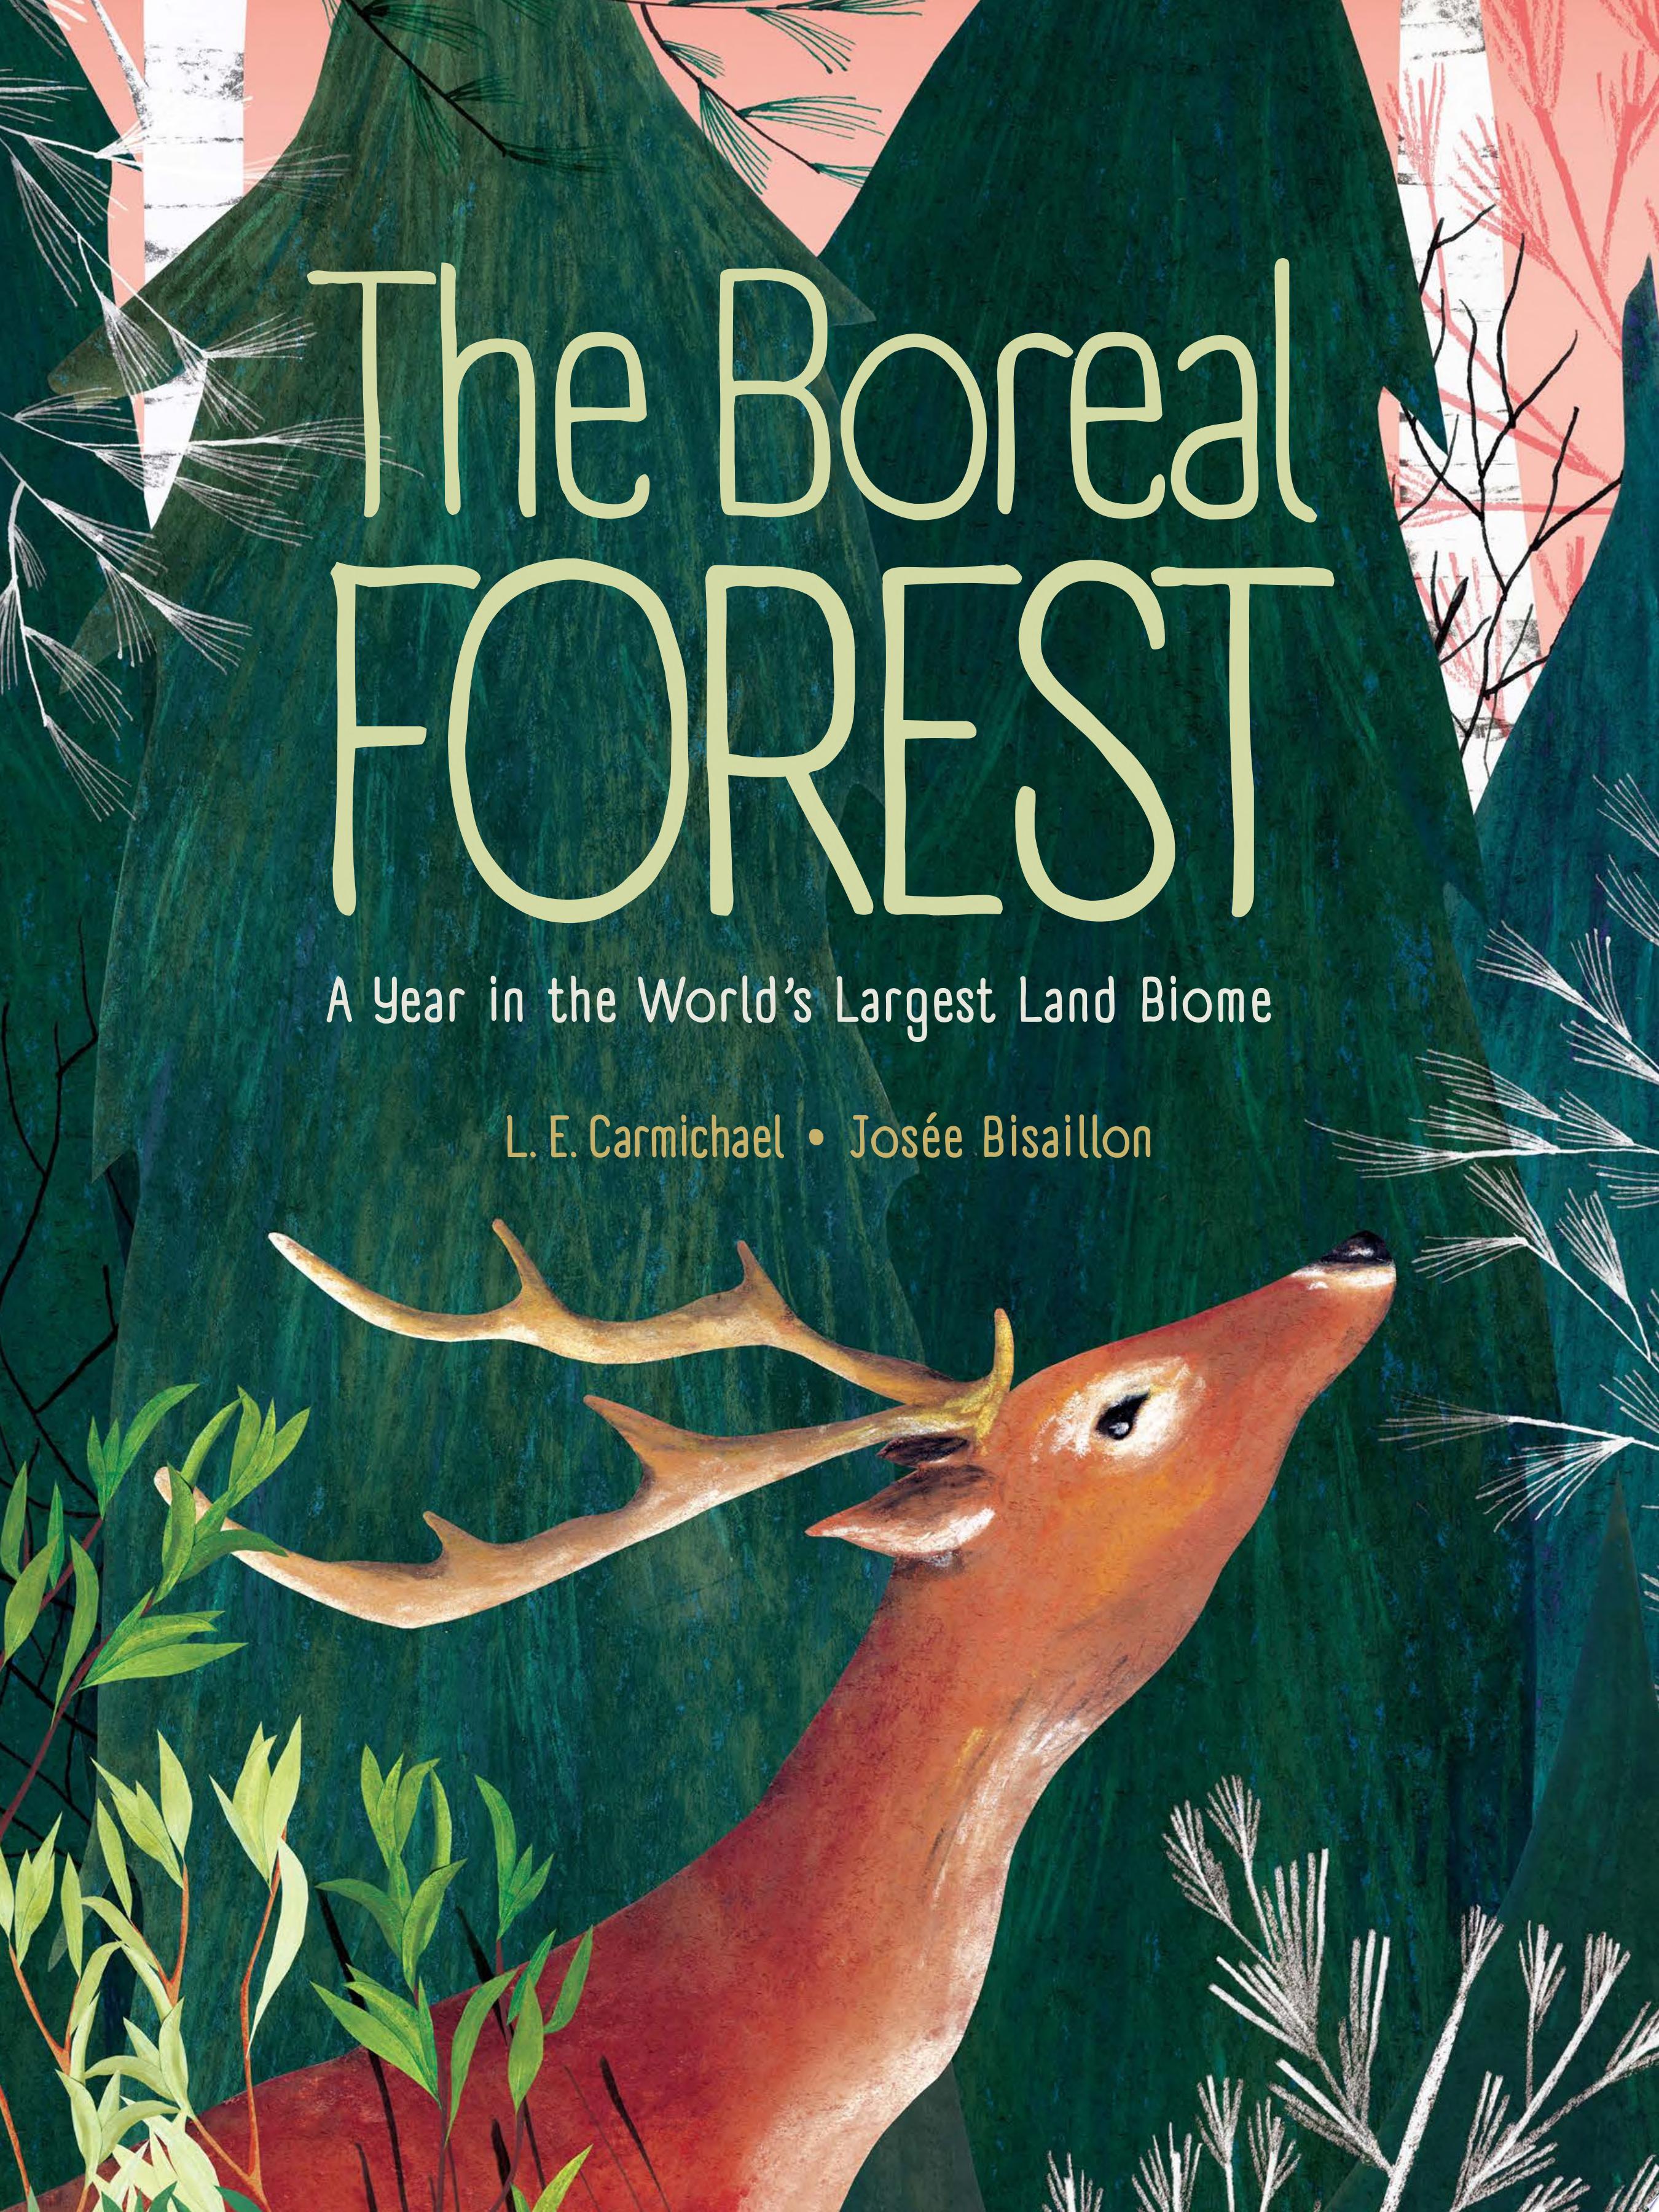 Image for "The Boreal Forest"